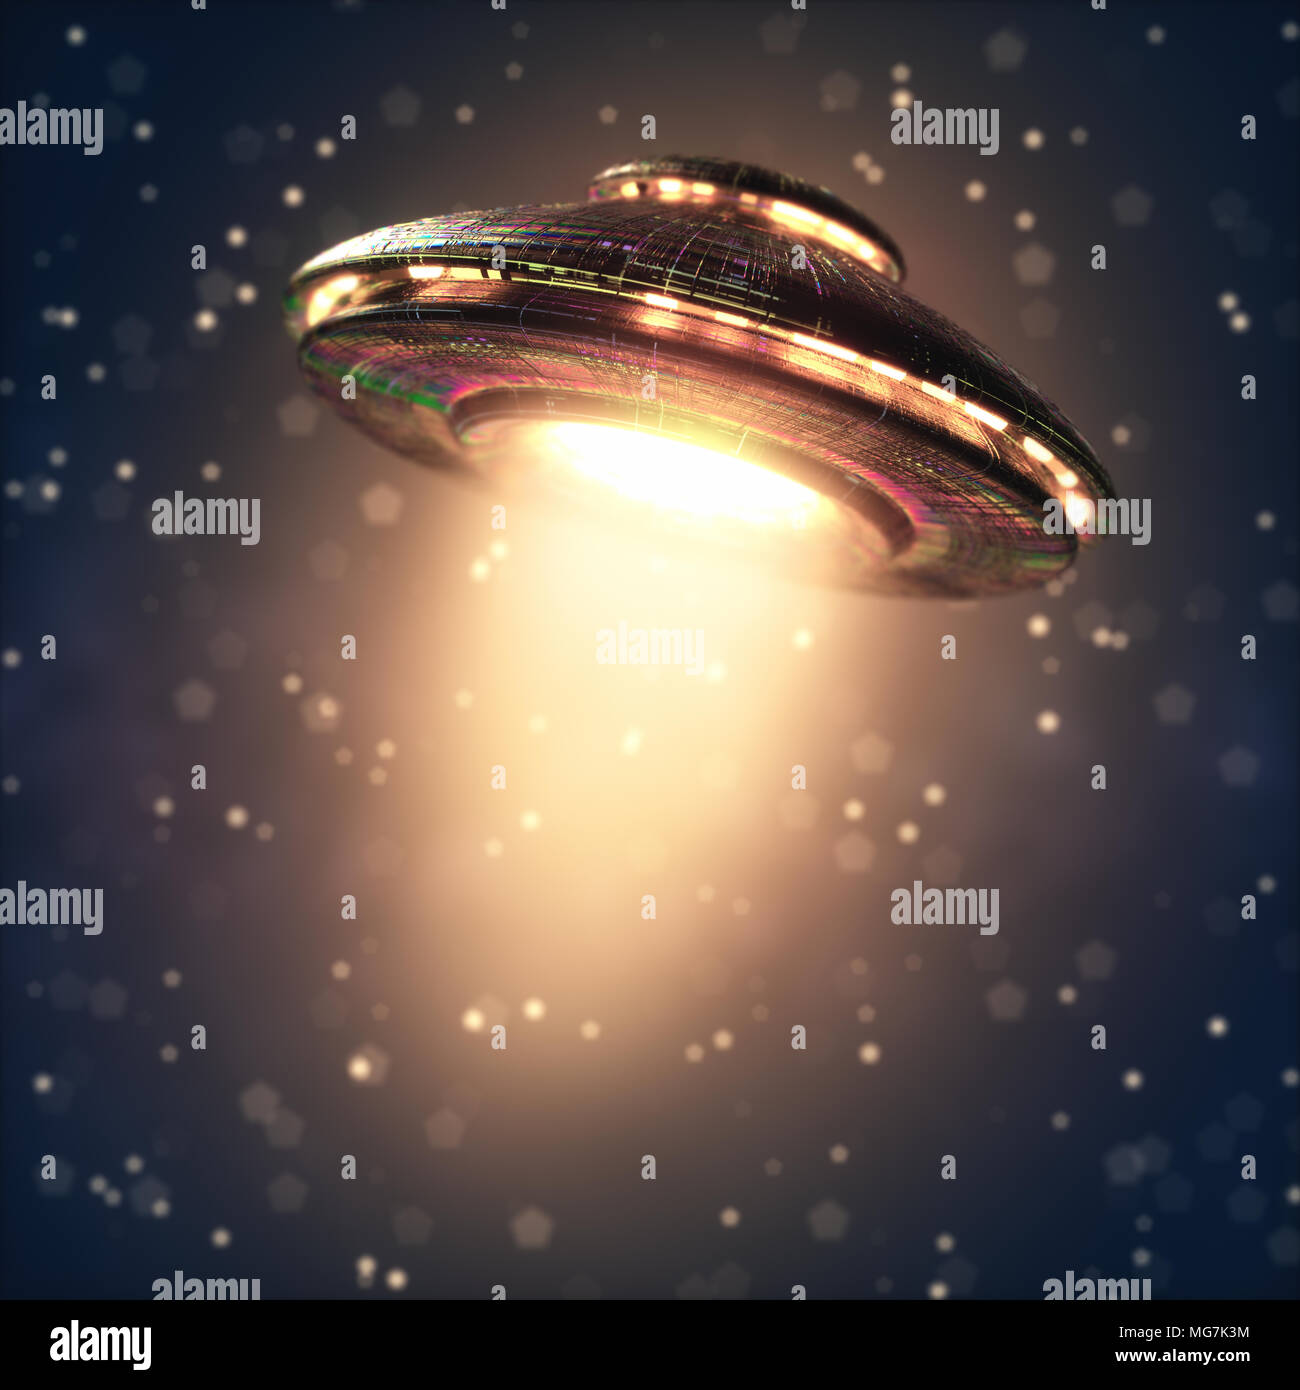 Extraterrestrial spacecraft with jet propulsion. Your text in the center of the image. Stock Photo